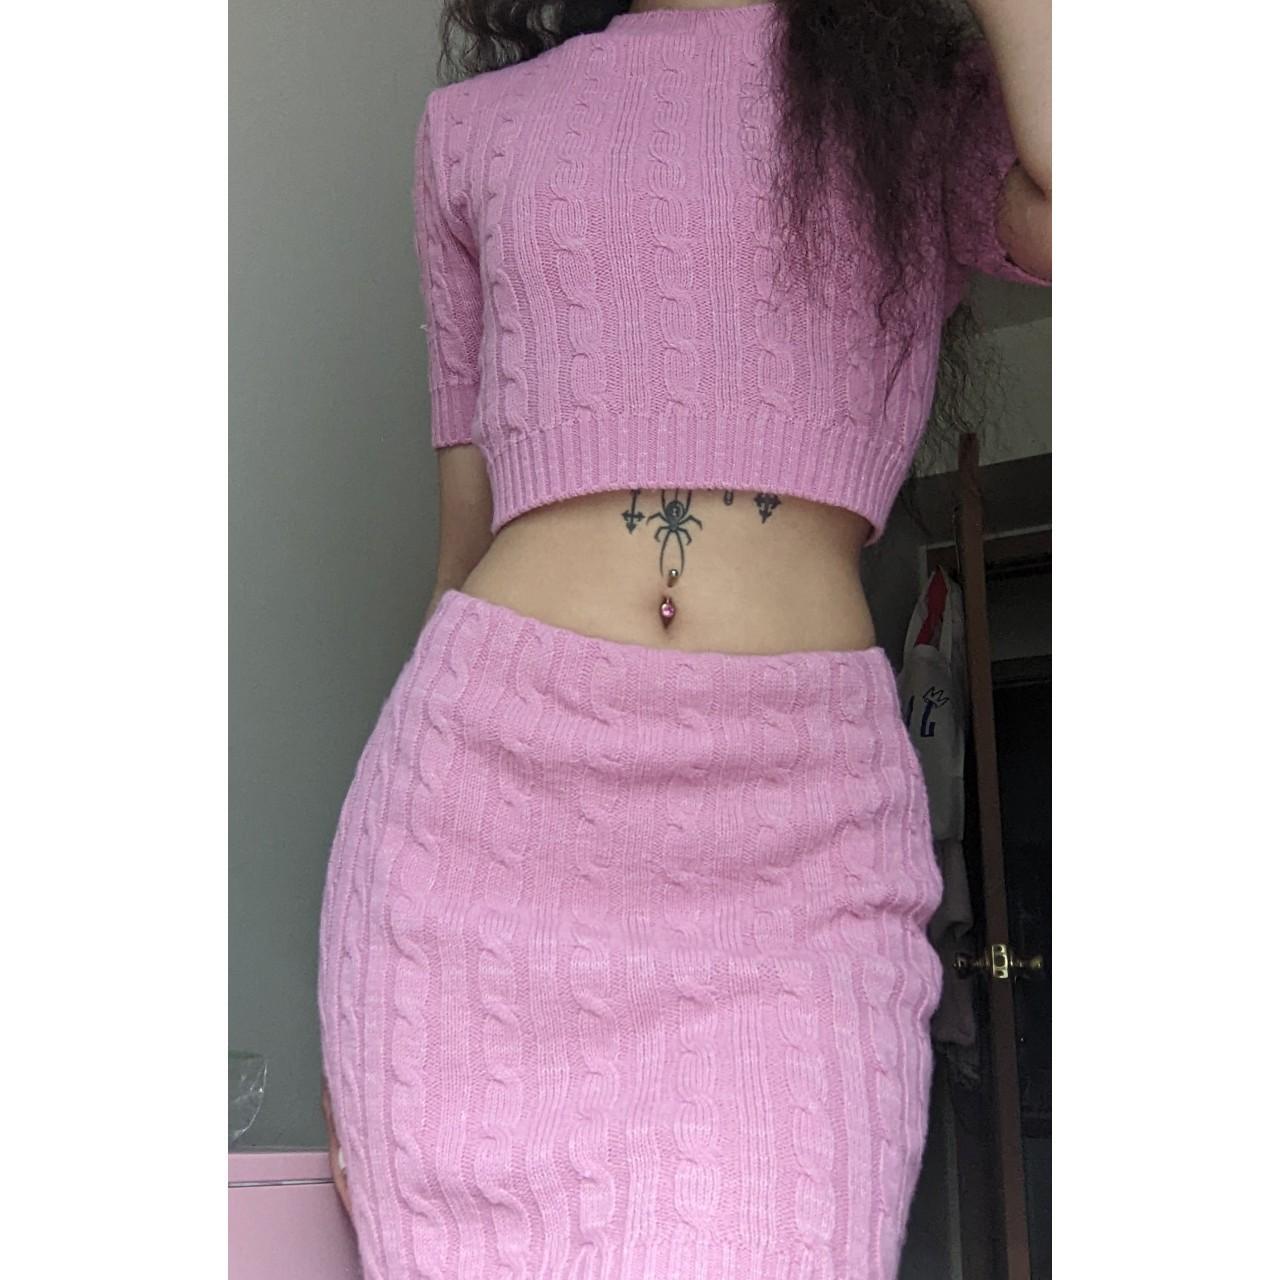 Product Image 1 - 💕PINK WINTER SKIRT SET💕
Stay warm